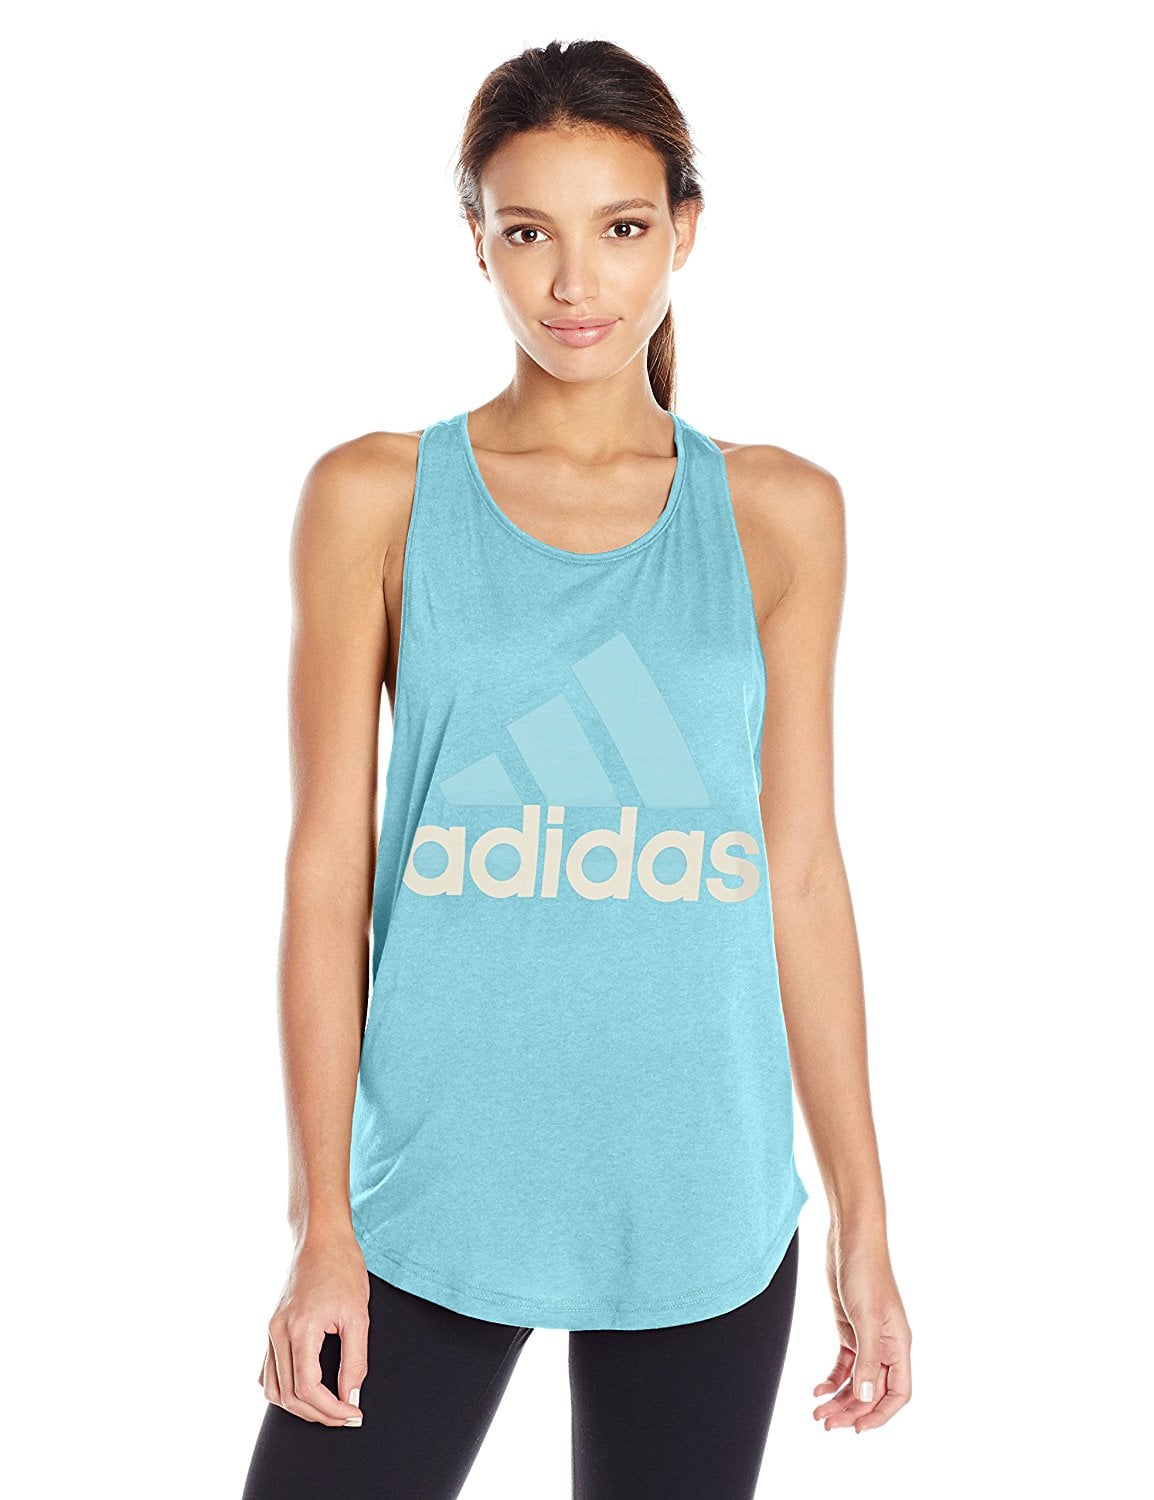 adidas women's workout outfits